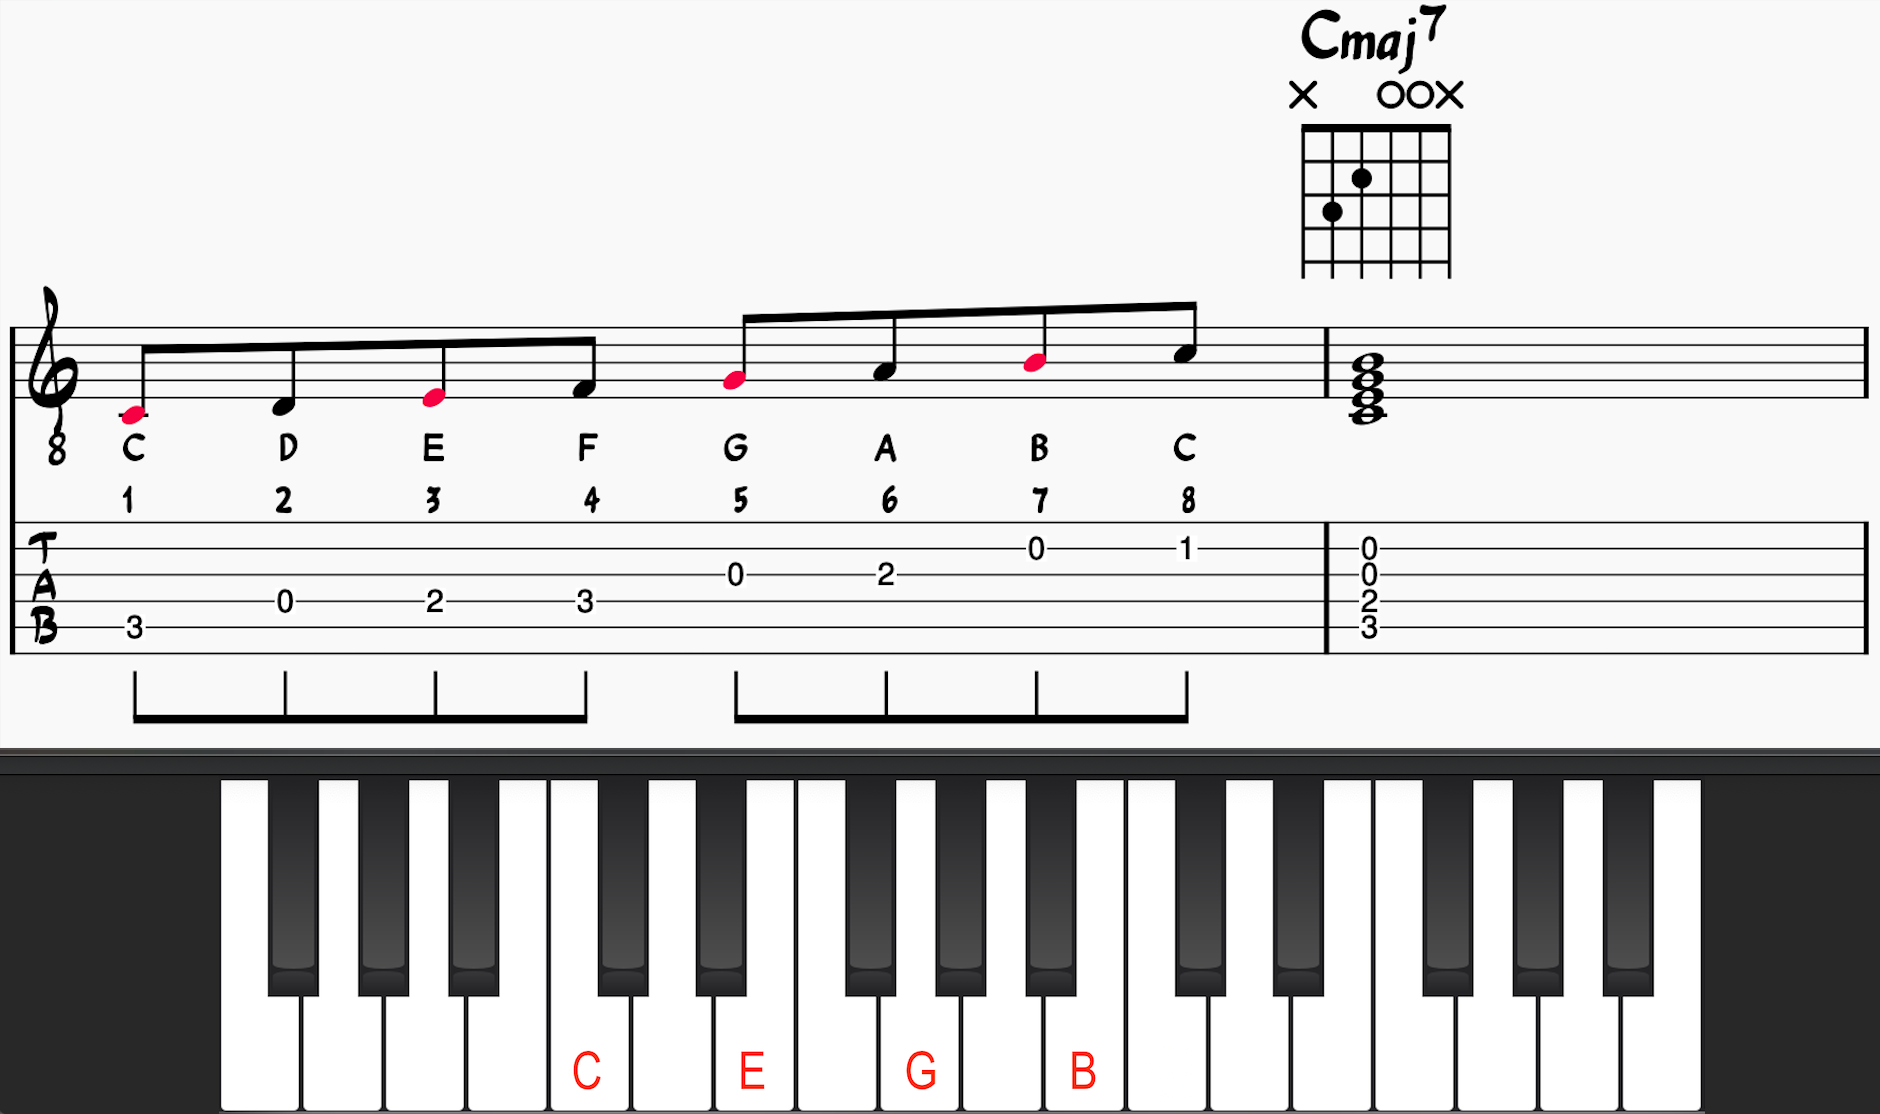 C major scale and Cmaj7 chord shown on guitar and piano